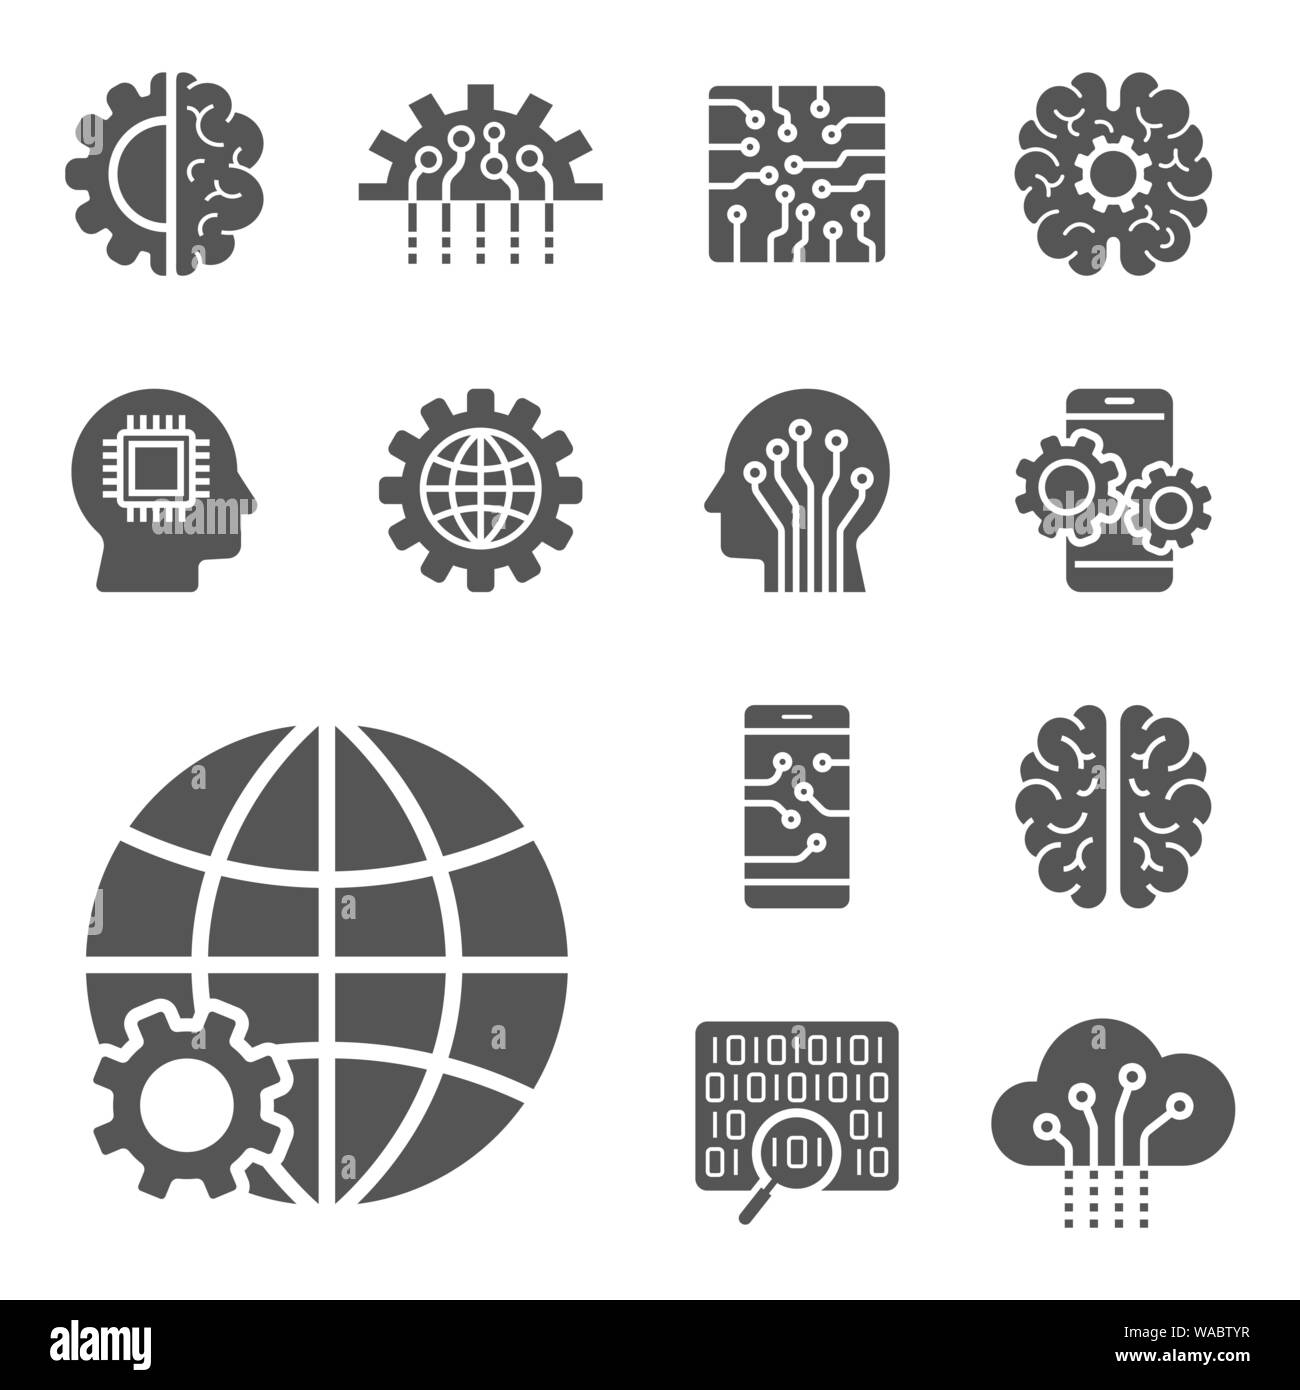 AI and IoT icons set. Symbols in flat outline design. EPS10. Stock Vector